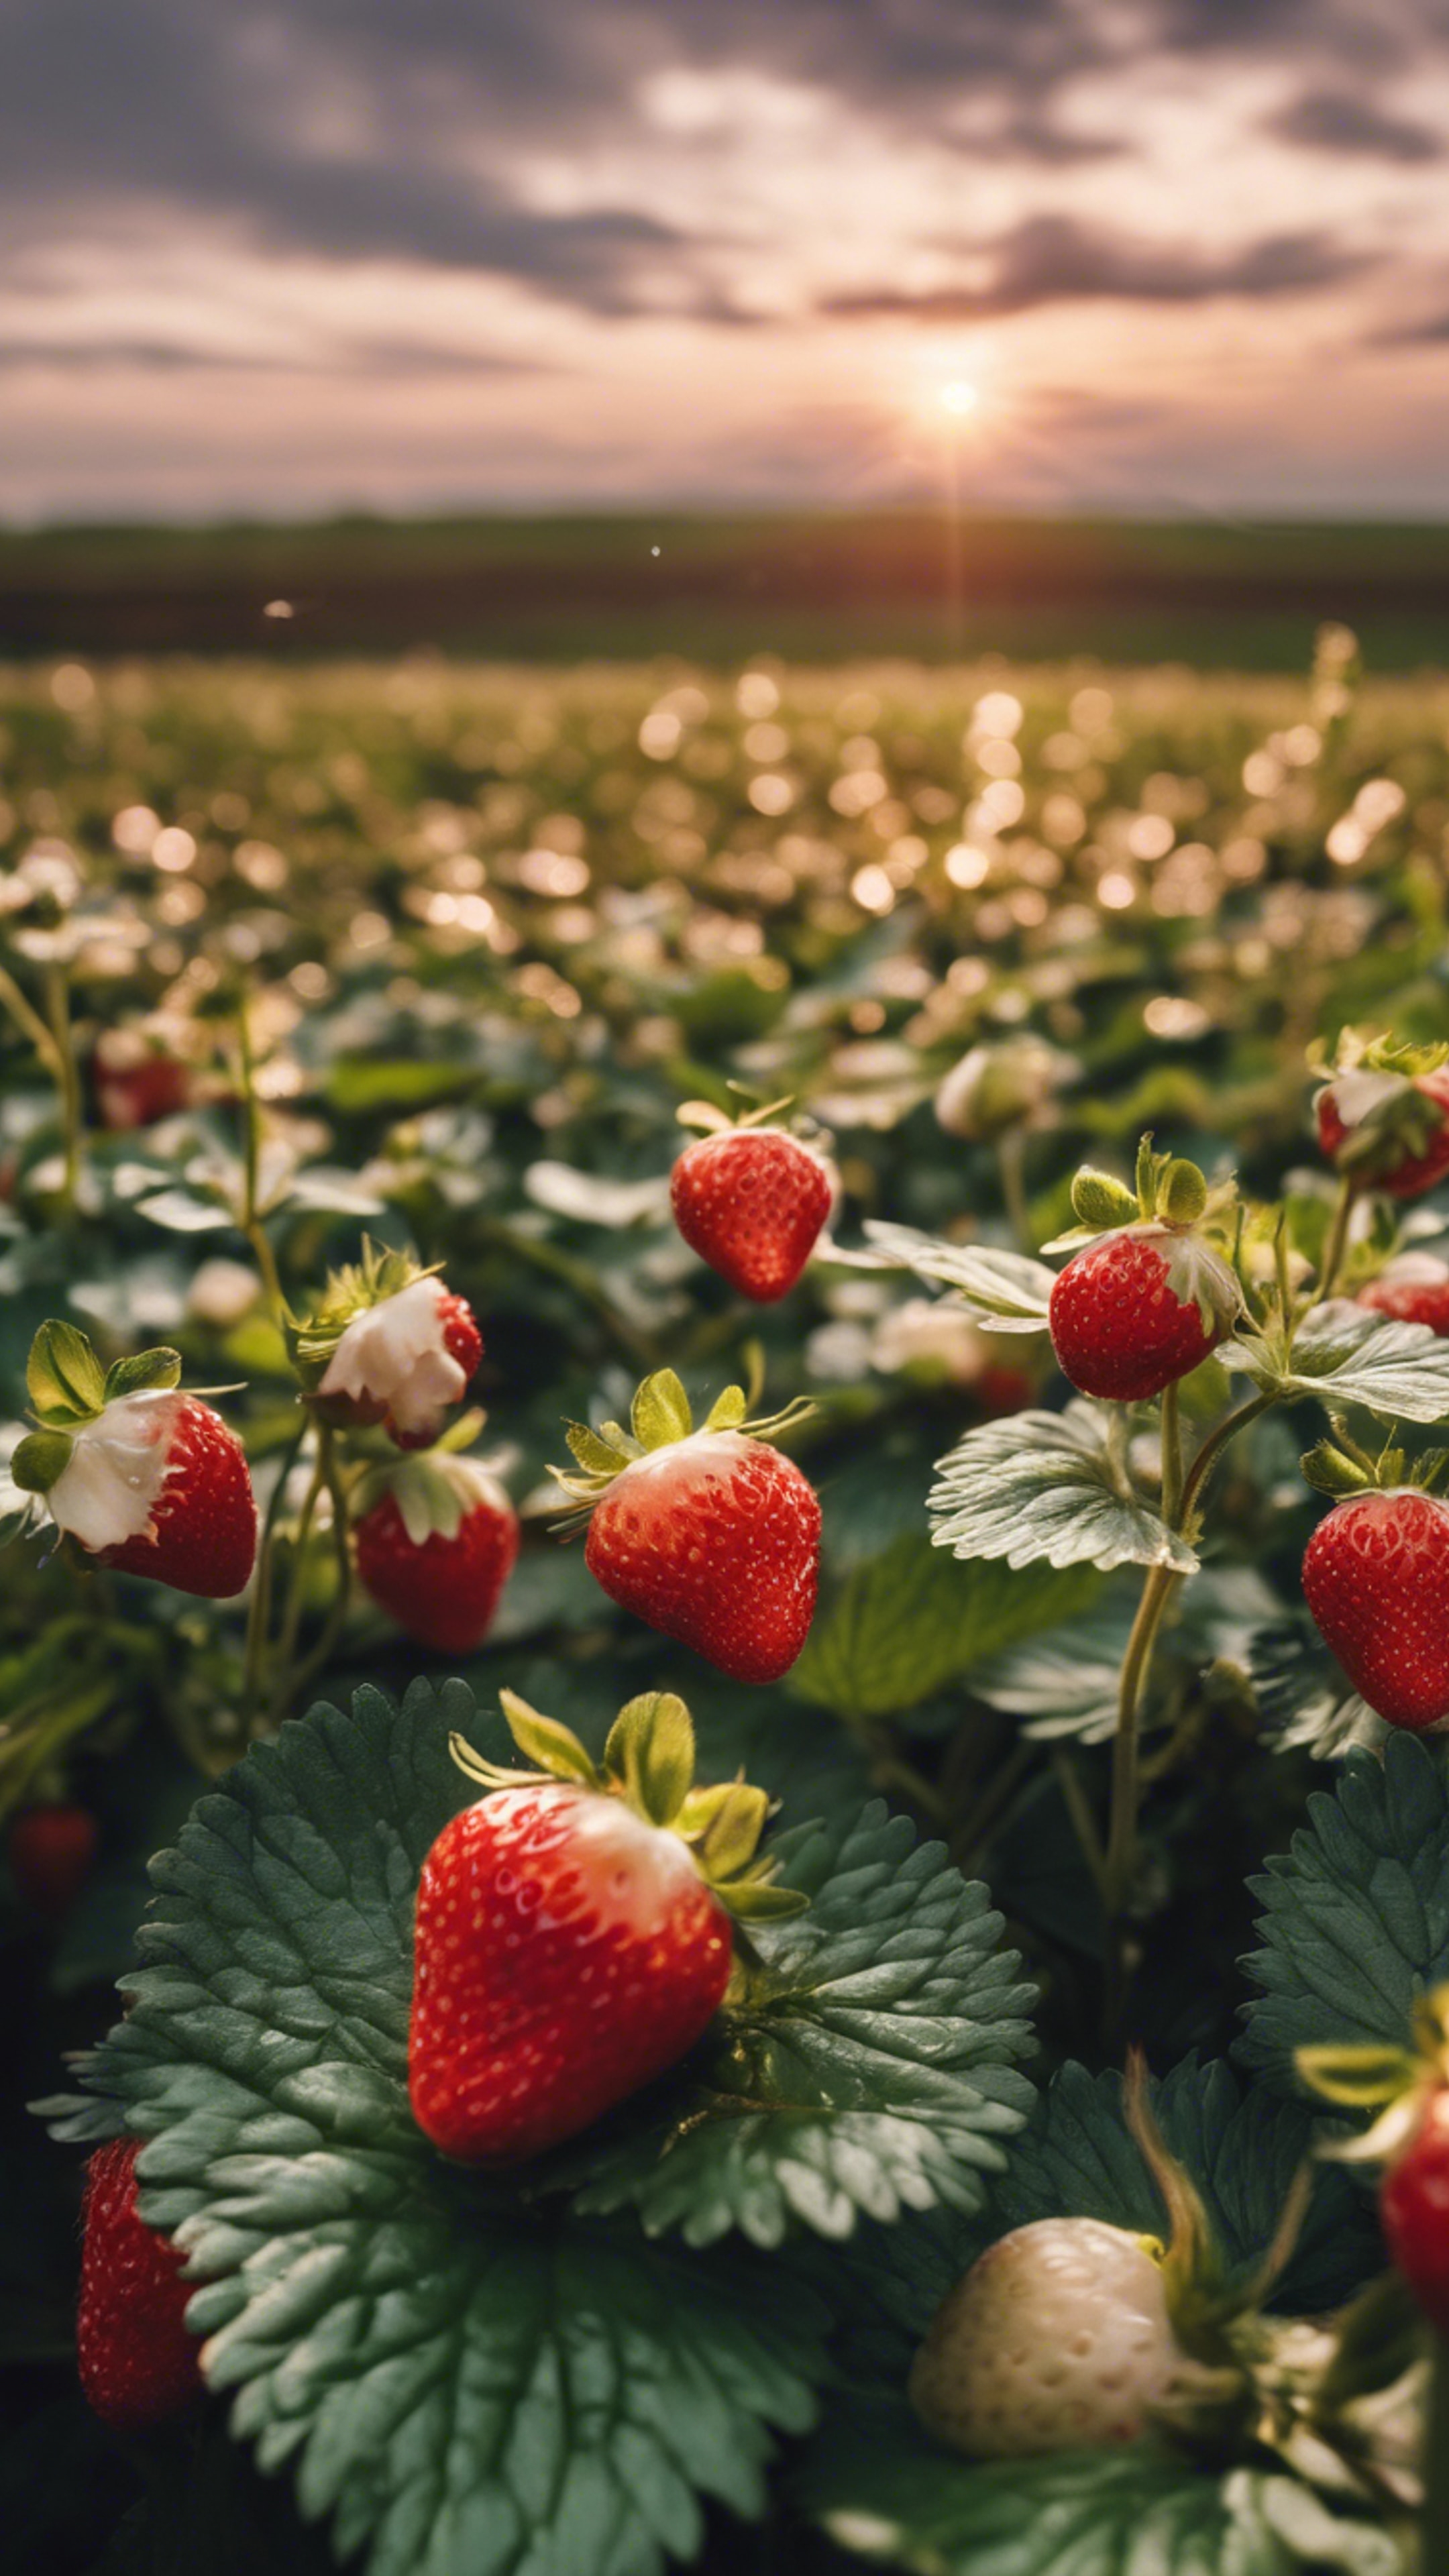 A romantic sunset view over a field of blooming strawberry plants. 墙纸[3adde1a5bf4e4528ba85]